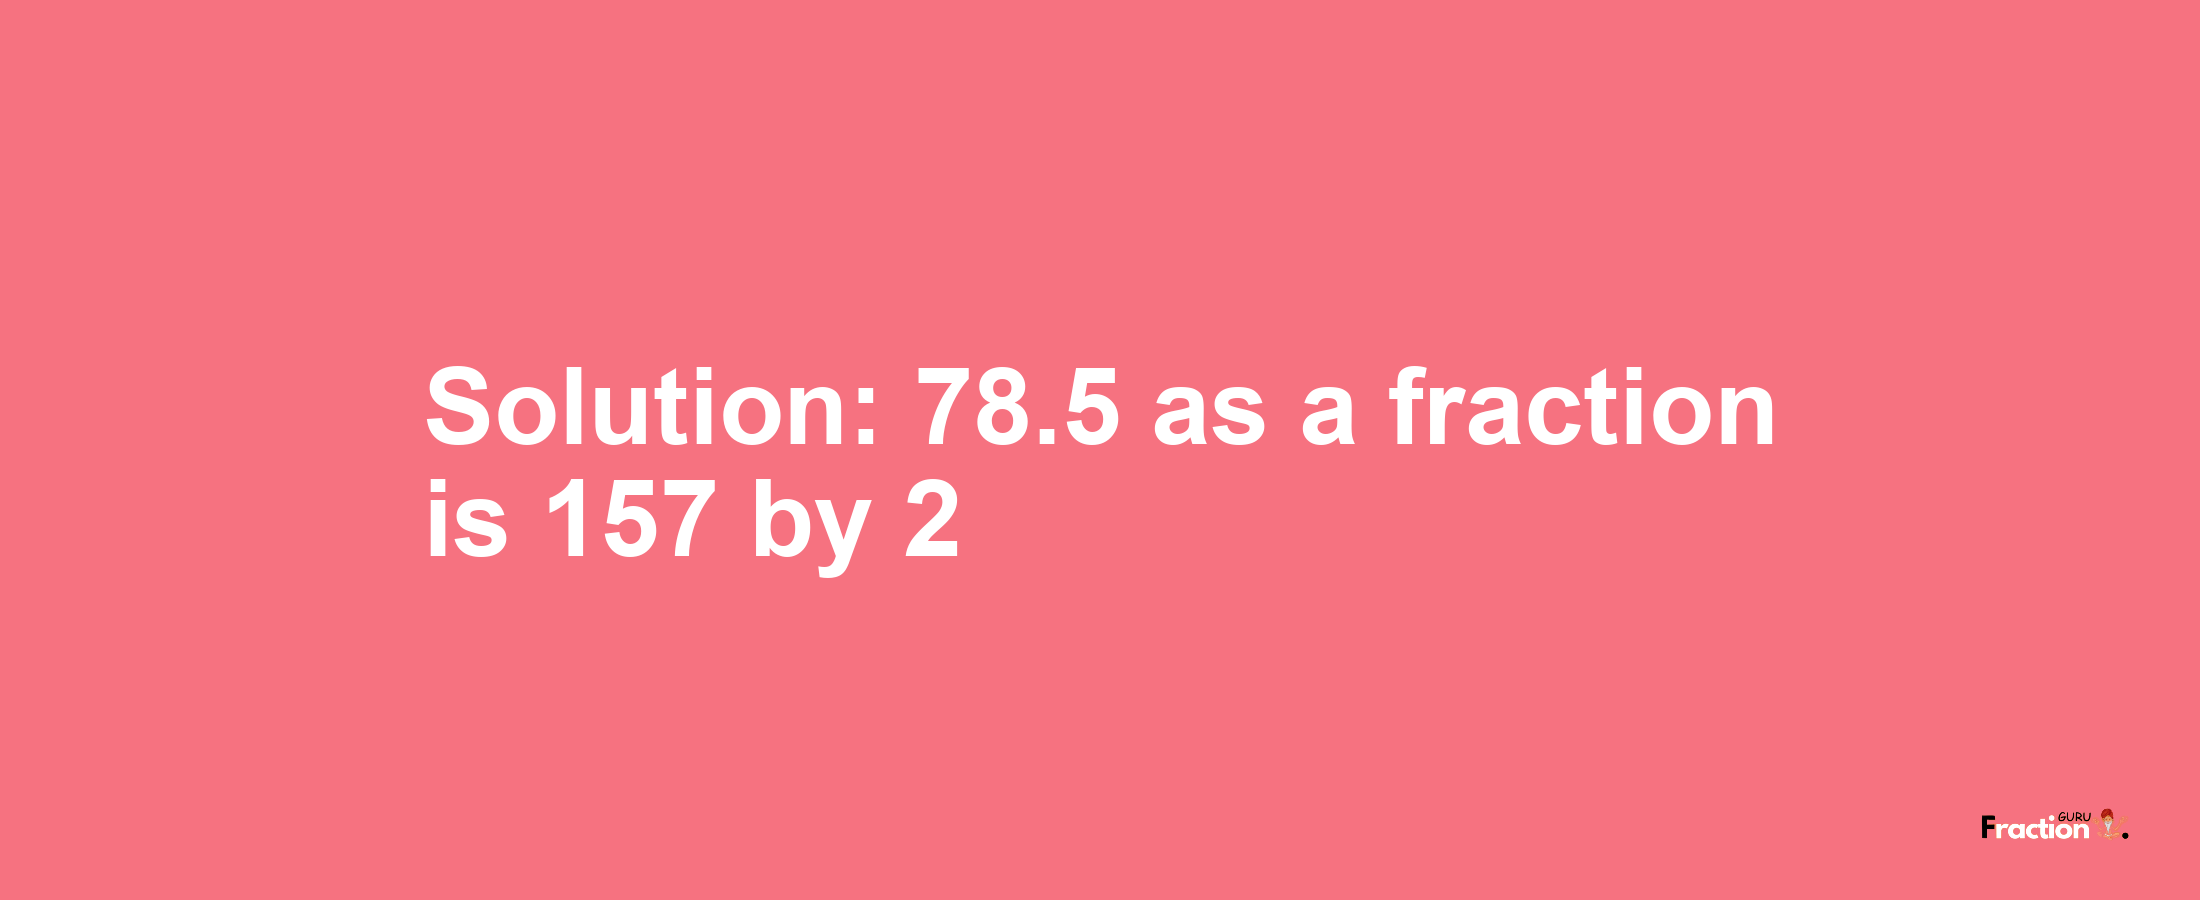 Solution:78.5 as a fraction is 157/2